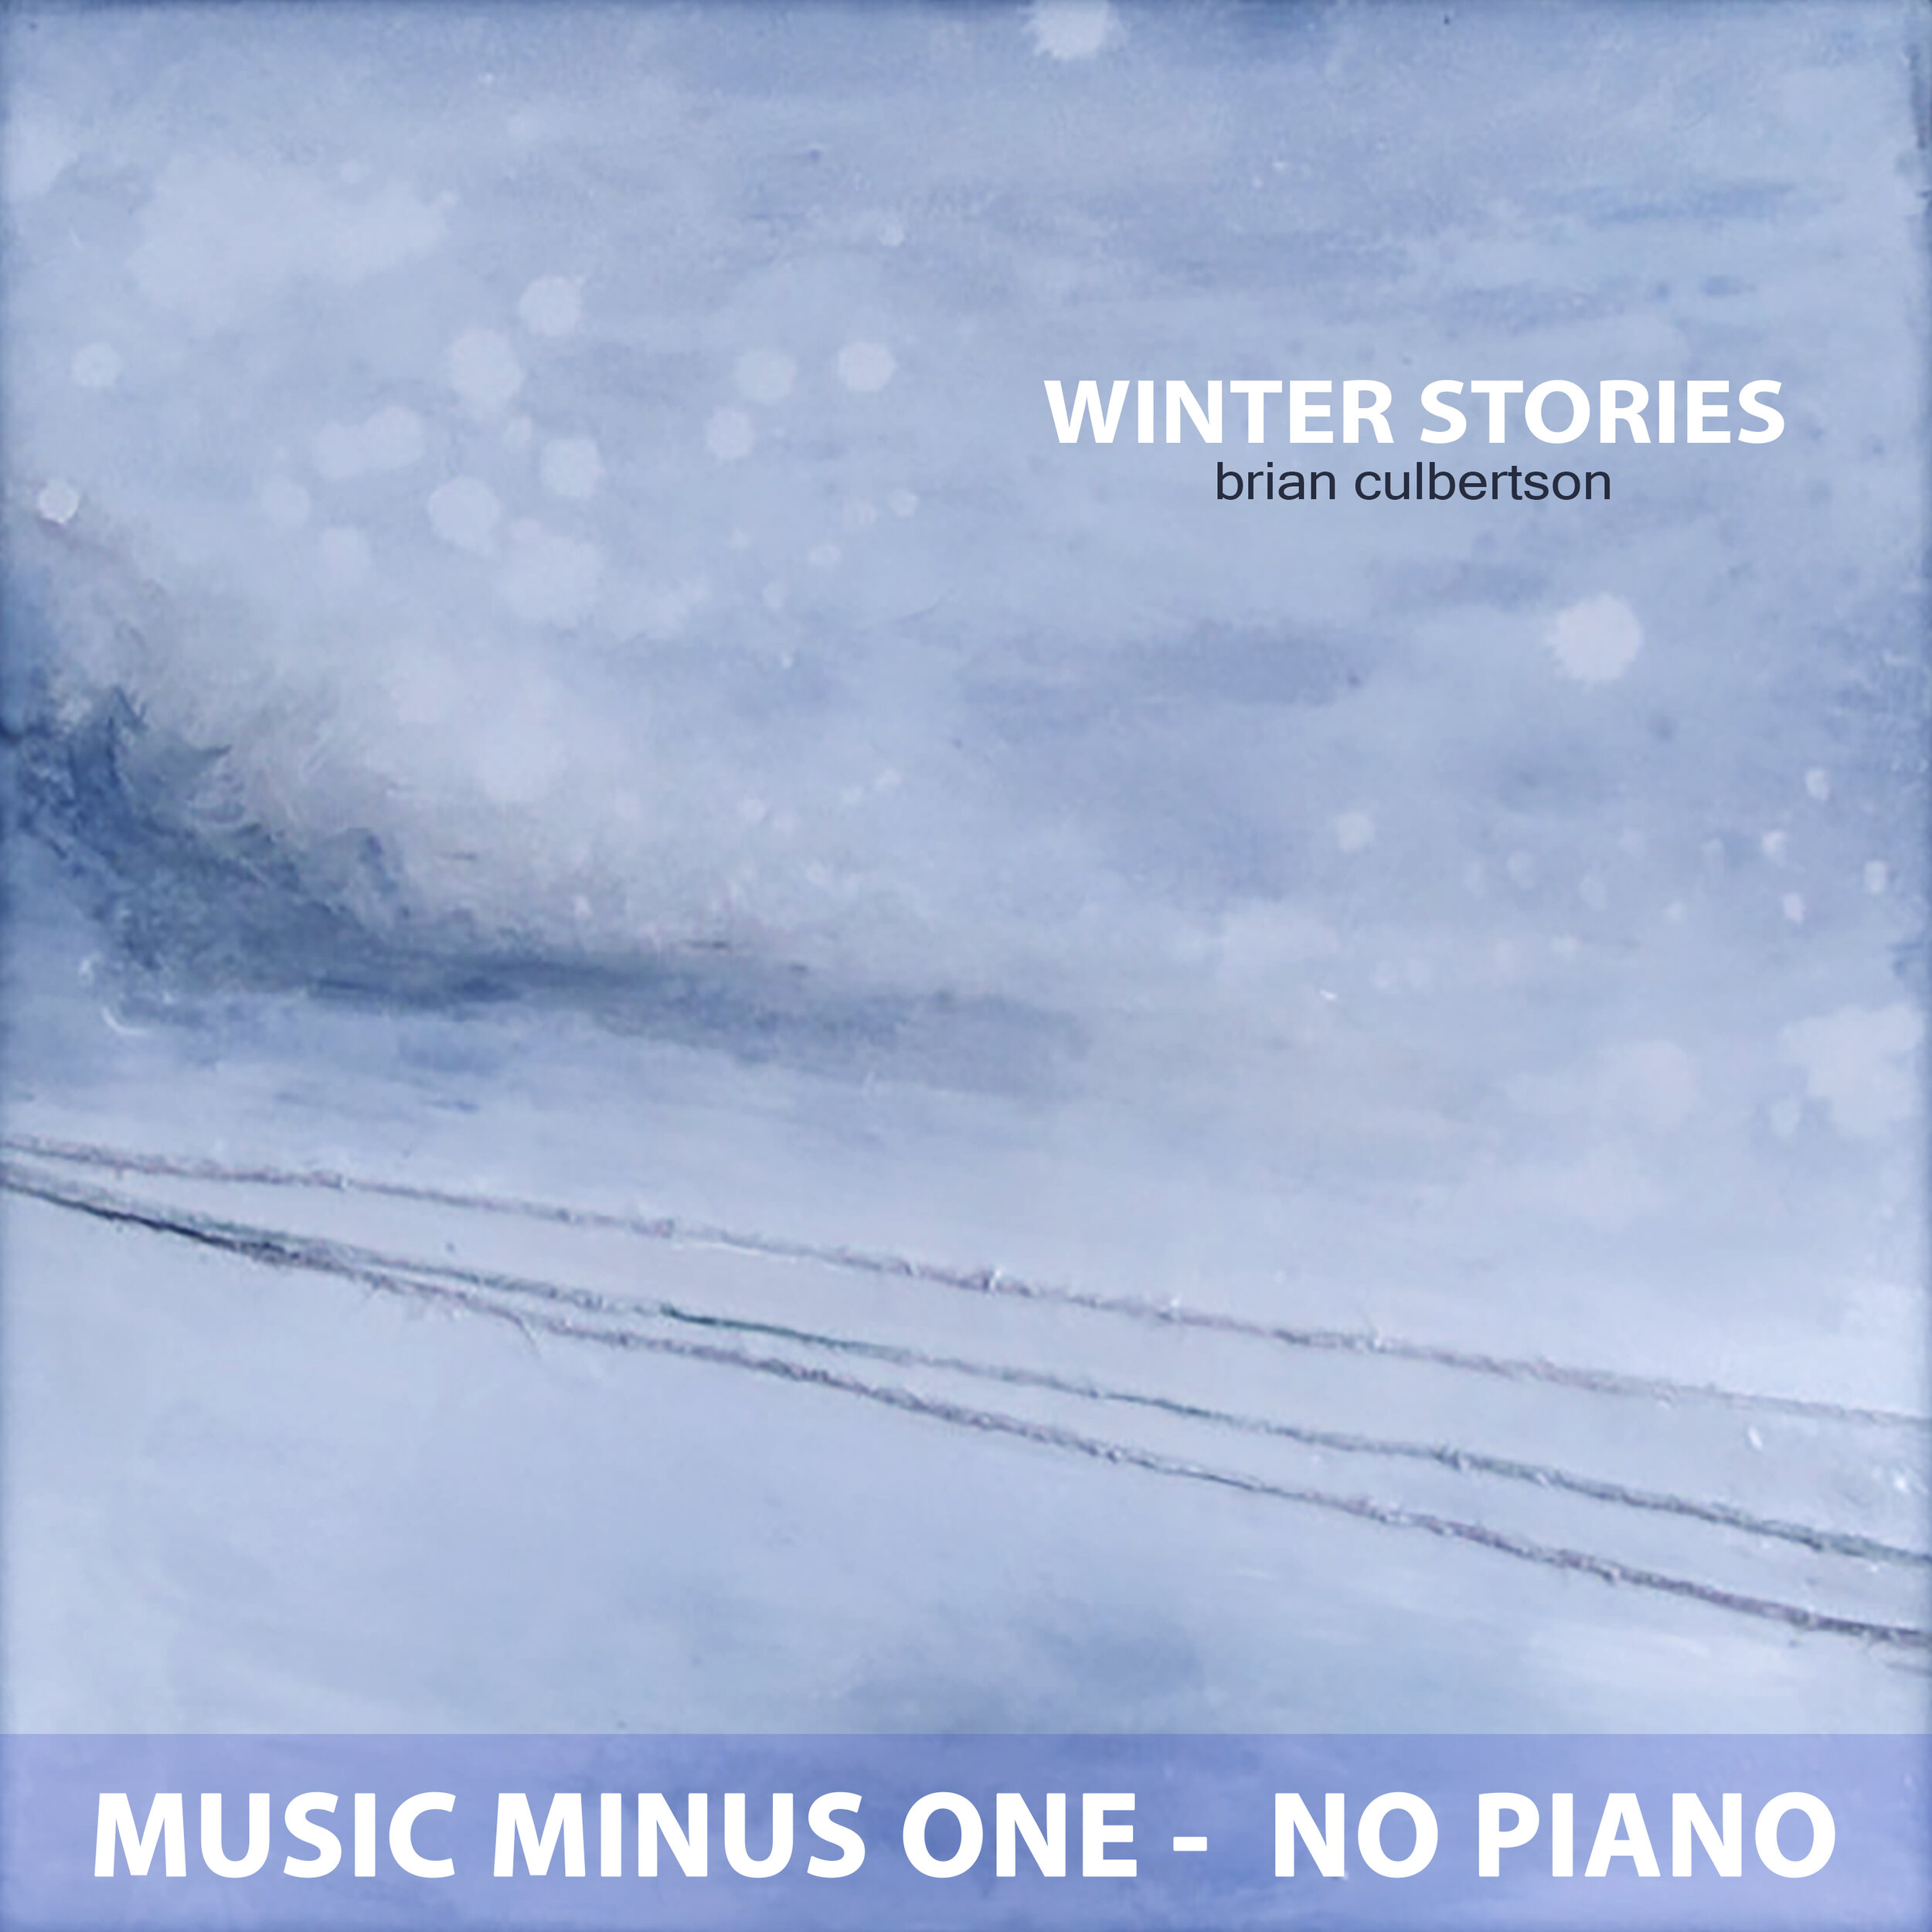 Winter Stories Cover NO PIANO.jpg